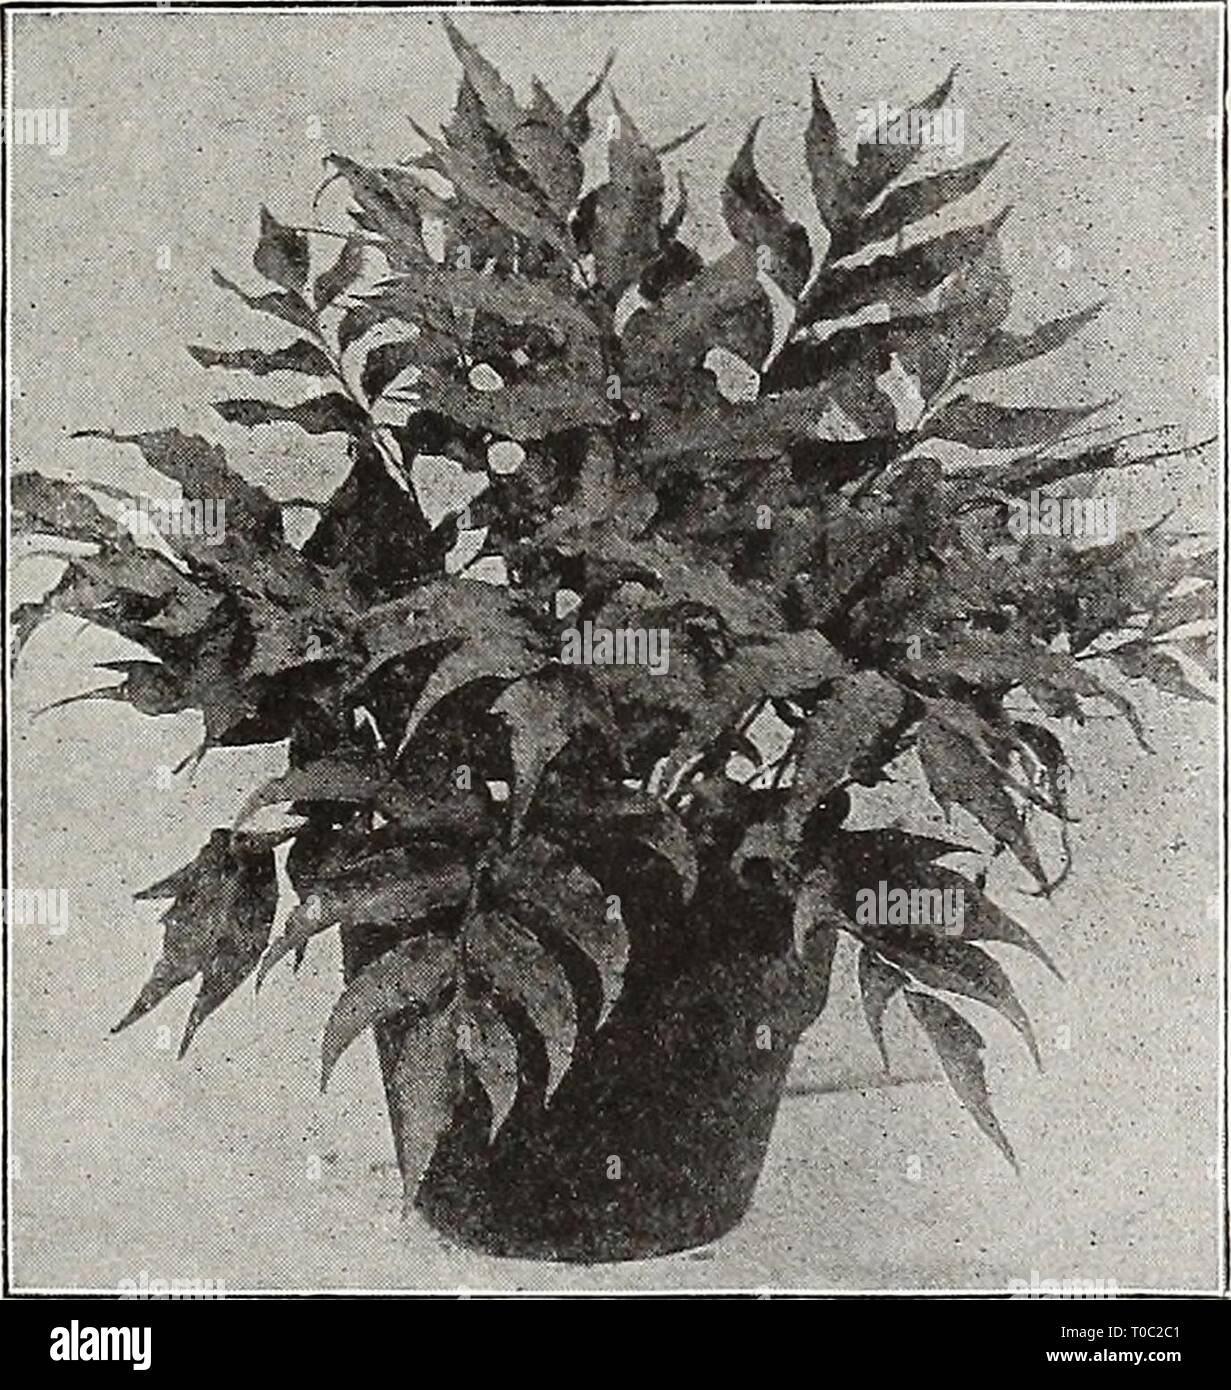 Dreer's garden book 1917 (1917) Dreer's garden book 1917 dreersgardenbook1917henr Year: 1917  Adiantum Farleyense Gloriosum Crytomium Caryotidium. cts. each. — Falcatum (Holly Fern). cts. each. 15 15 ||£|£. ' -•iMH 1seS&gt;- - ^ggi&fc H^S&gt; K ^^^ ^ Cyrtomium (Holy Fern) Lygodium Japonicum. — Scandens. 15 cts. each. — Fortunei. 15 cts. each. Davallia Affinis. 25 cts. each. — Epiphylla. 50 cts. each. Goniophlebium Subauricula= tum. If grown in a suspended basket in a moist conservatory will produce fronds 8 to 10 feet long. 50 cts. each. Lastrea Chrysoloba. 20 cts. each. Lomaria Ciliata. A dwa Stock Photo